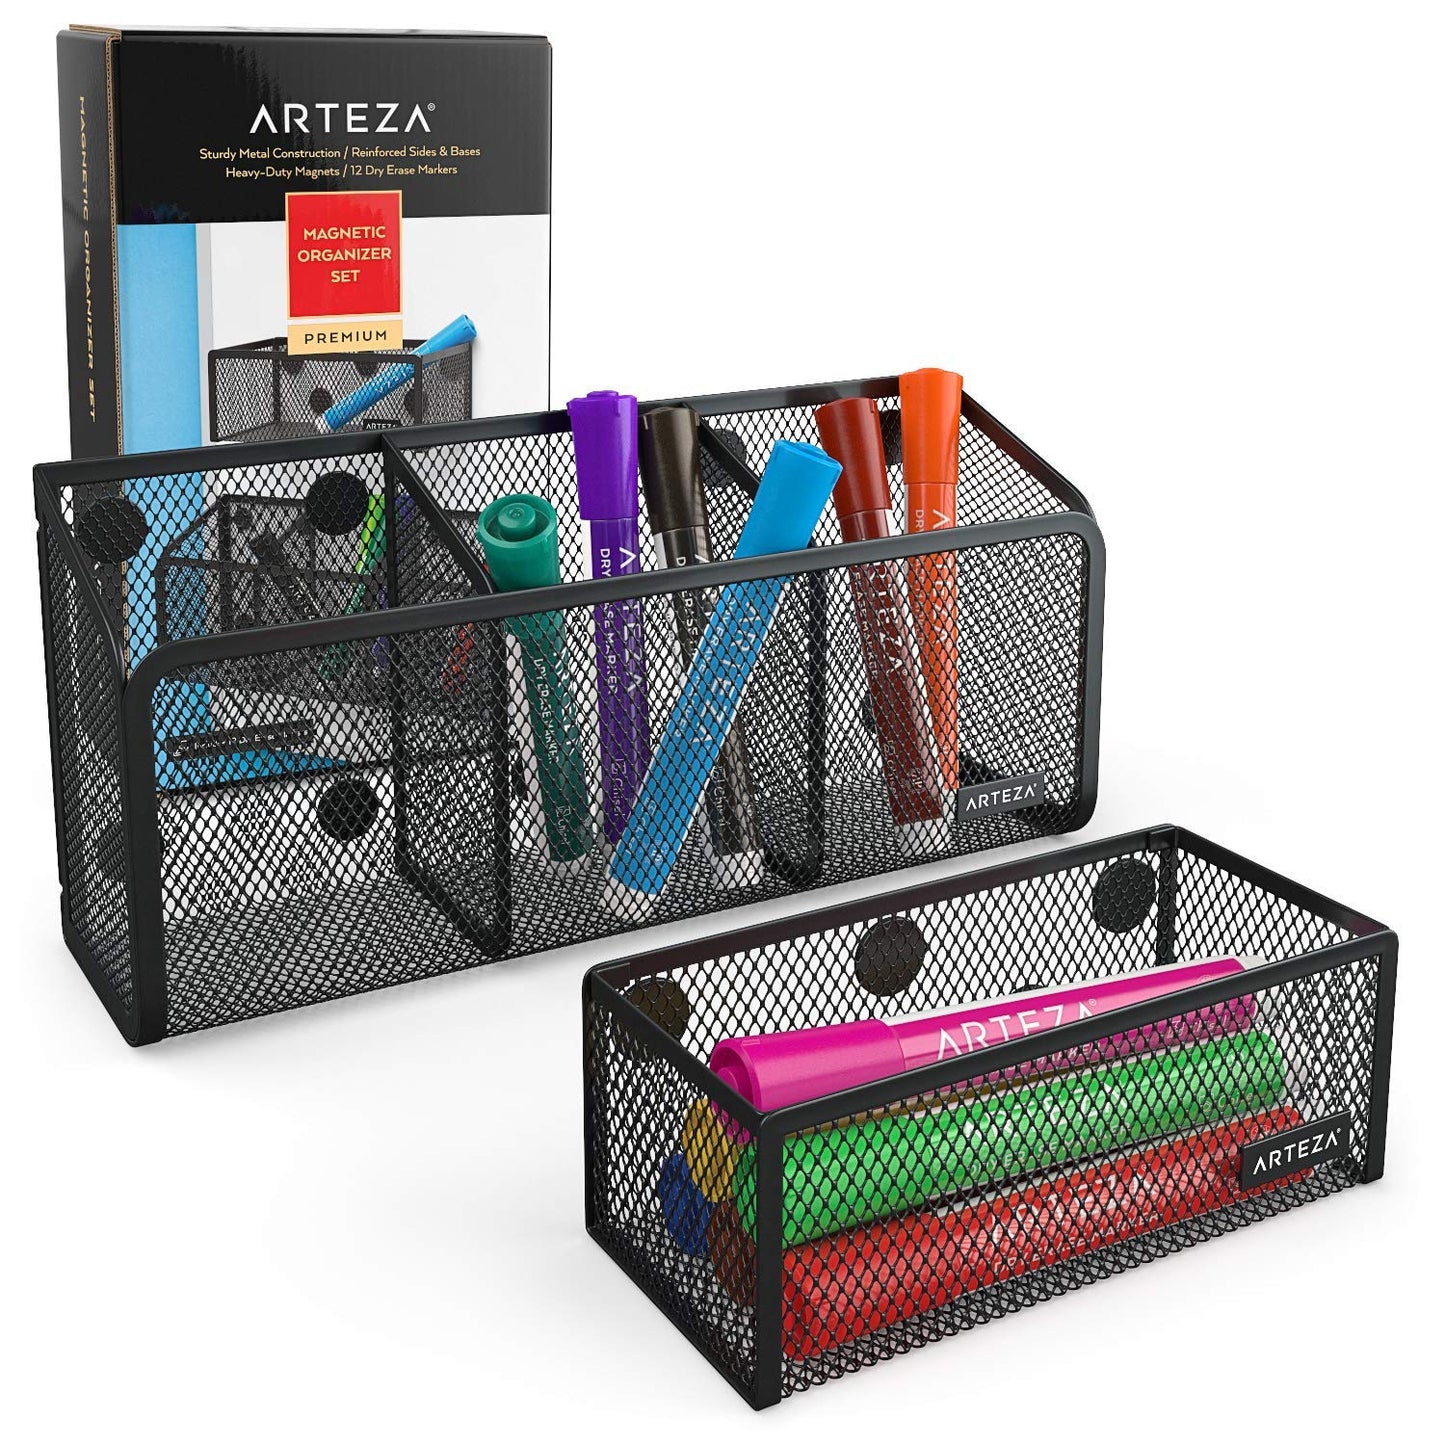 Arteza Mesh Magnetic Organizers - Set of 2 & 12 Dry-Erase Markers